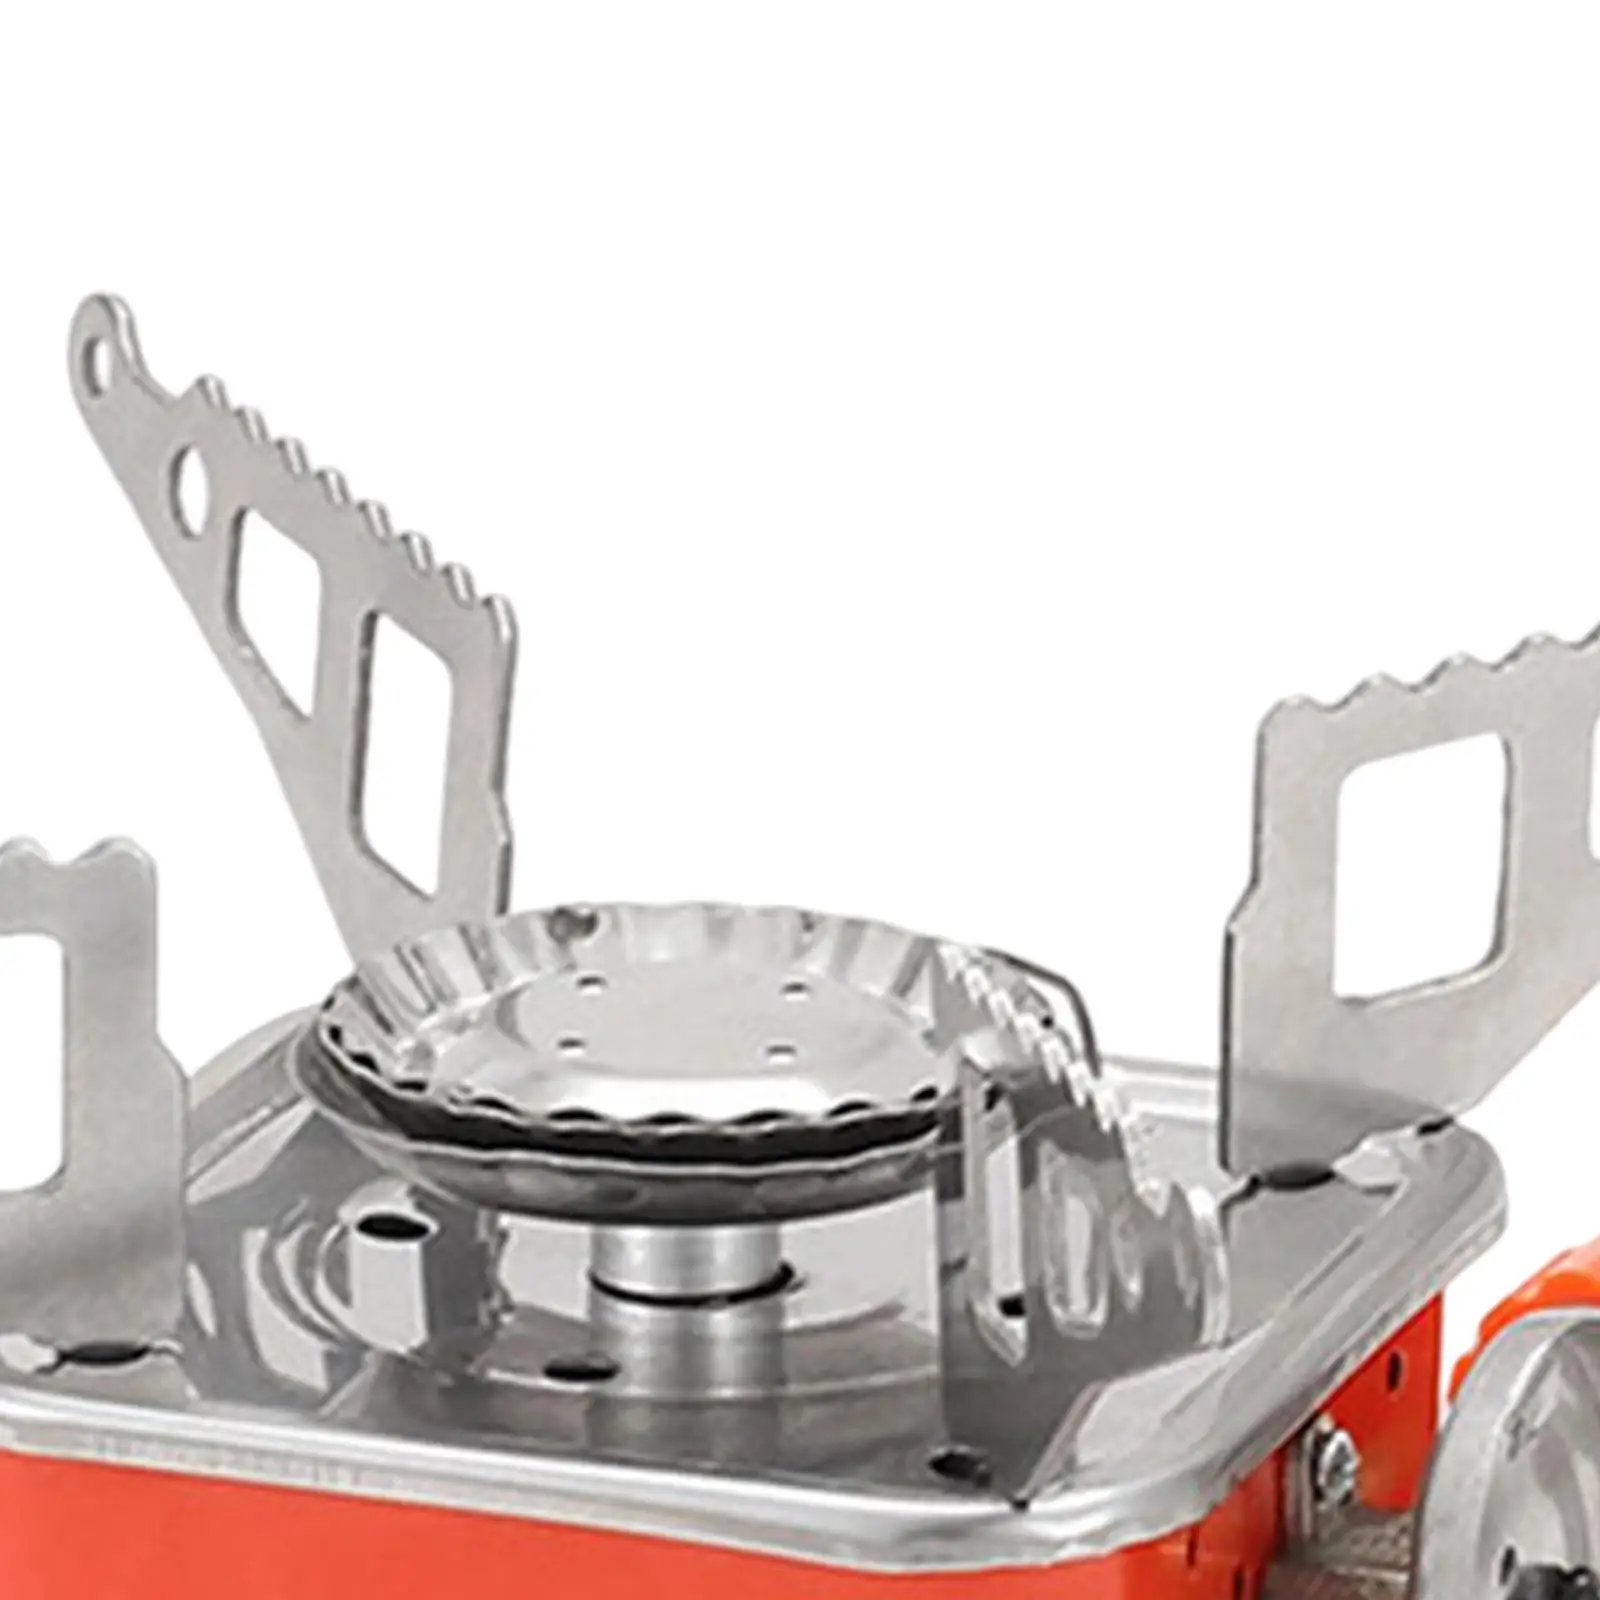 Portable Camping Gas Stove with Carrying Case Foldable Mini Cooking Cooker Gear Camp Stove for Picnic Fishing Outdoor Hiking